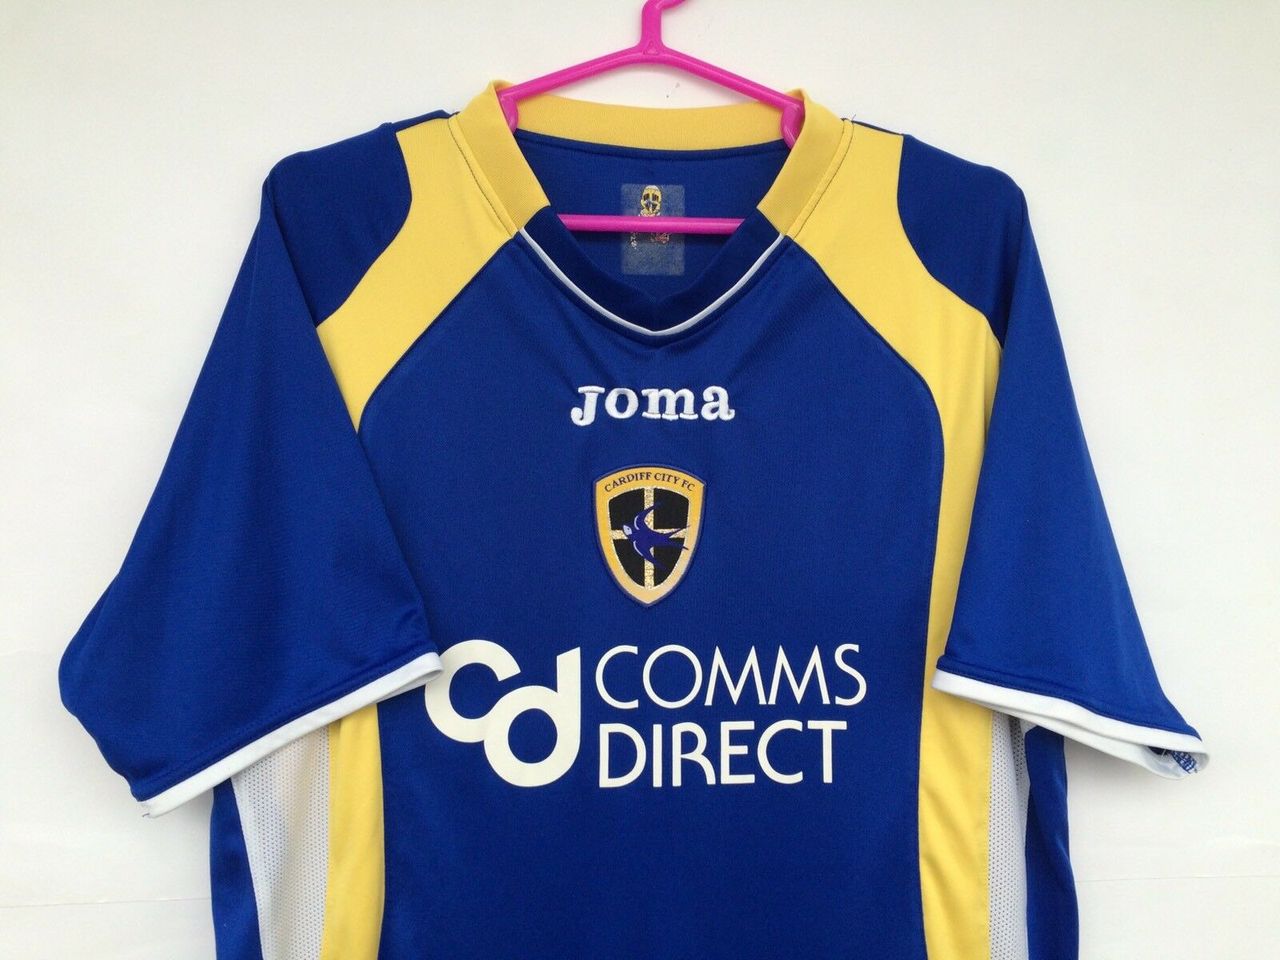 Cardiff City 07/08 Joma new home kit preview